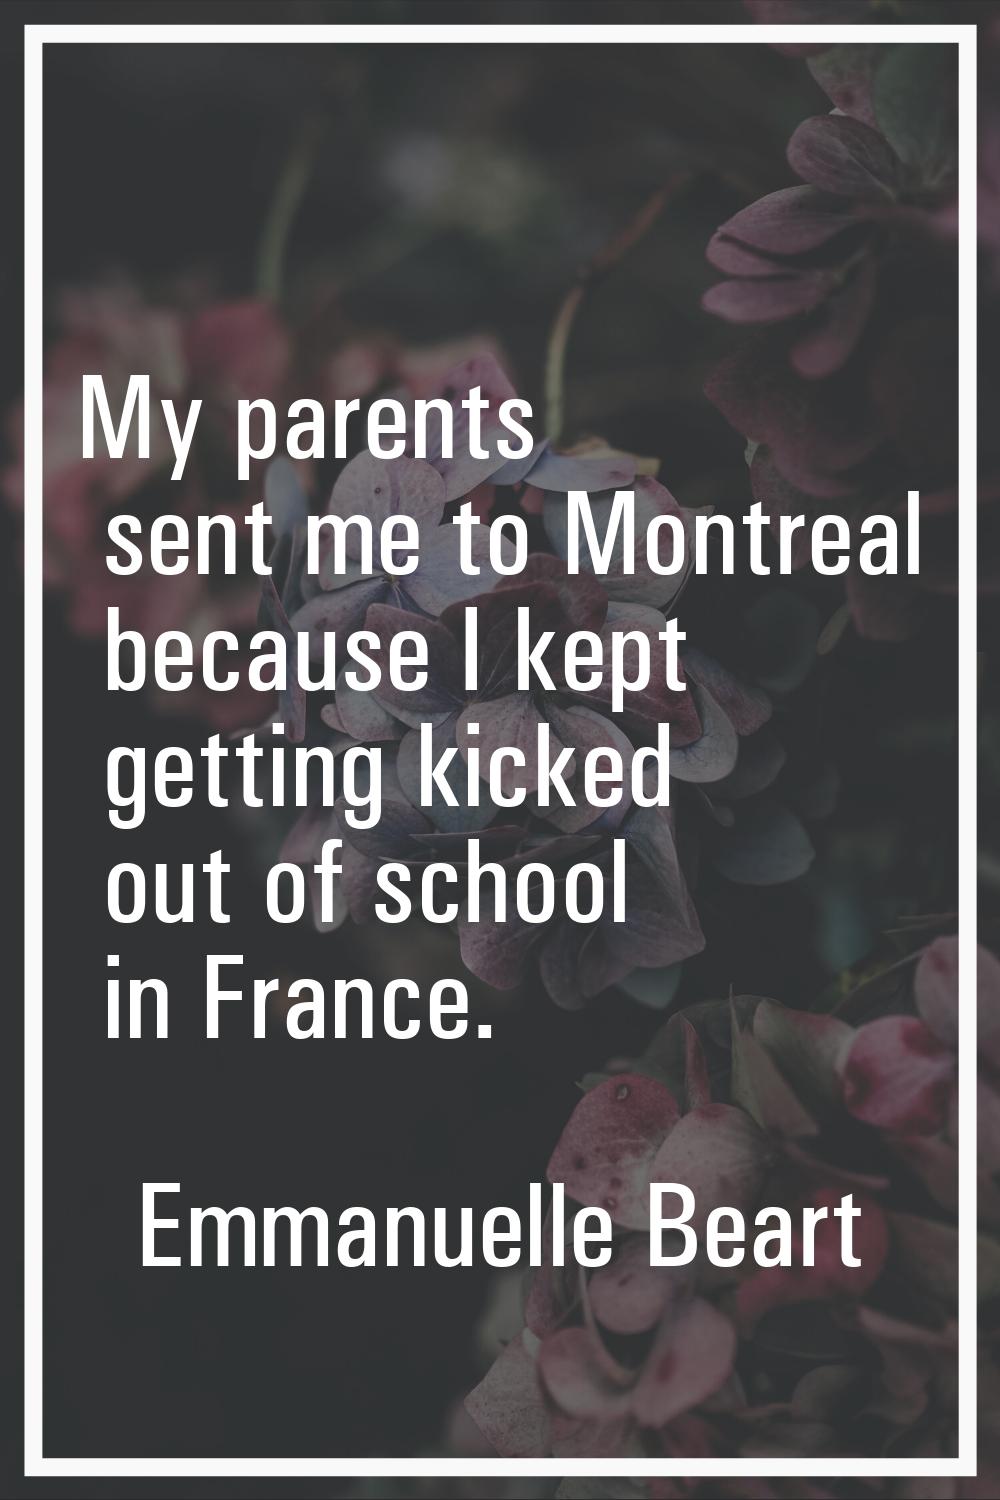 My parents sent me to Montreal because I kept getting kicked out of school in France.